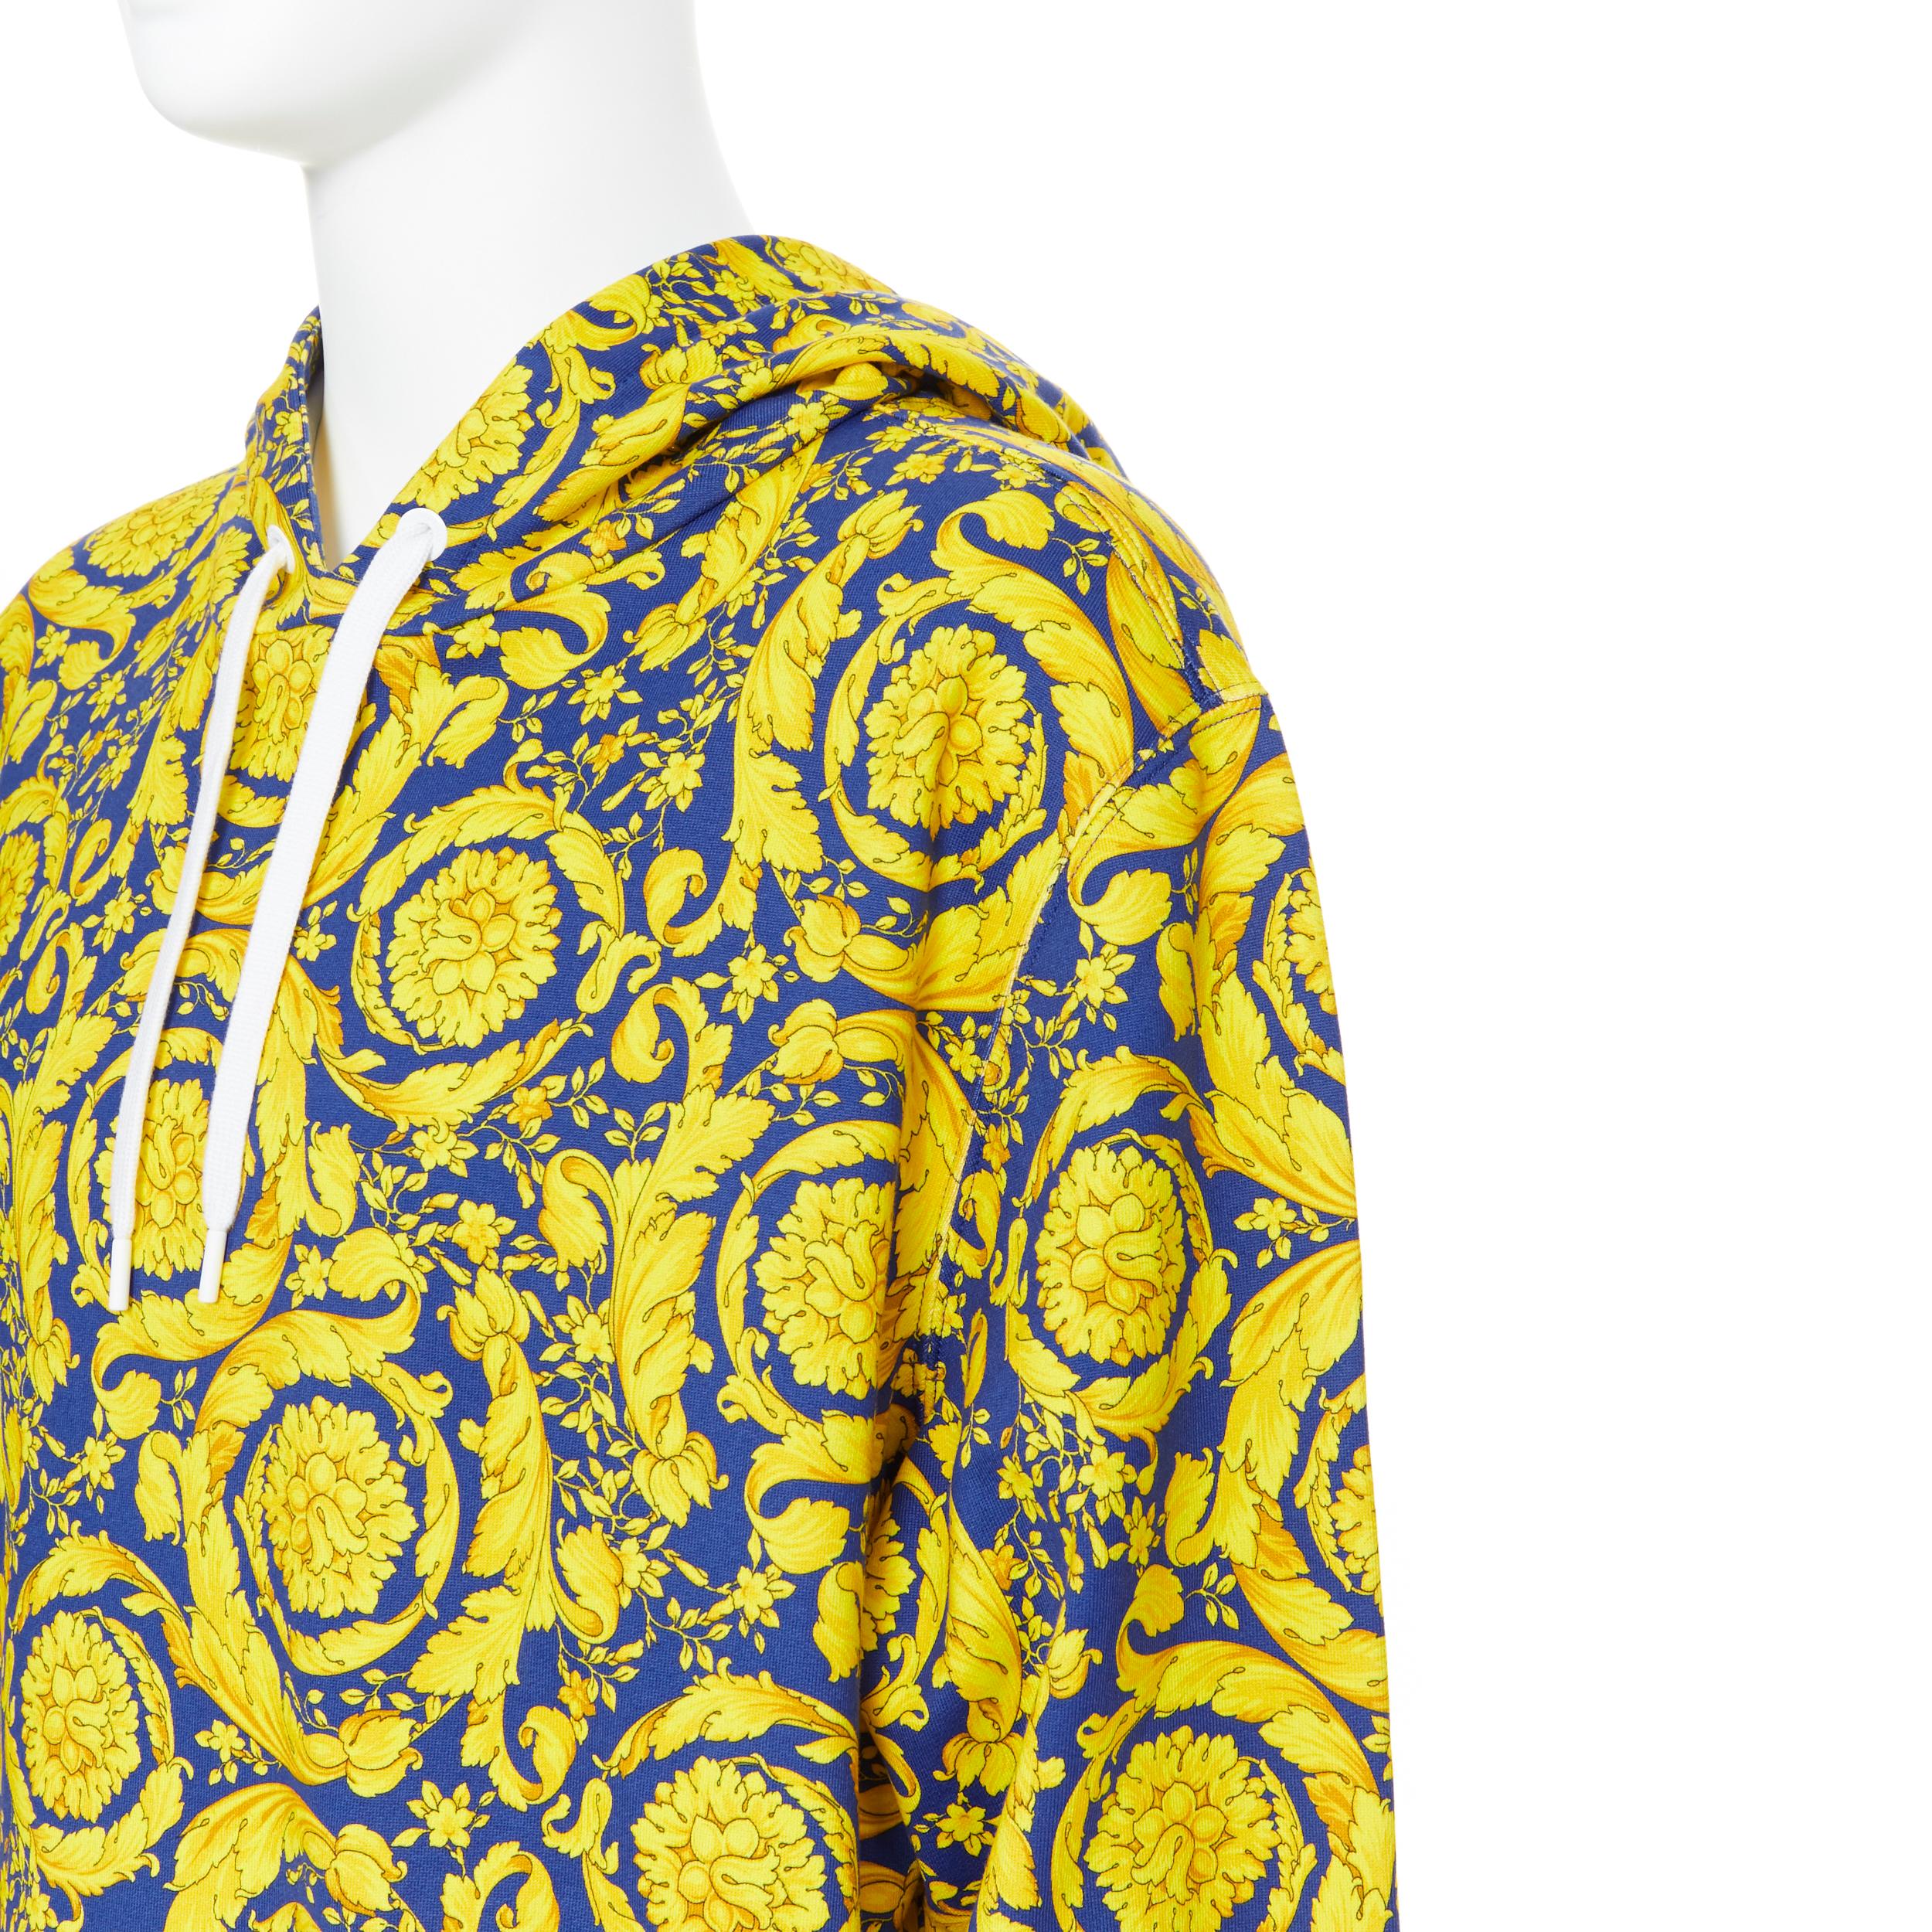 new VERSACE royal blue gold floral baroque print 100% cotton hoodie sweater 3XL 1